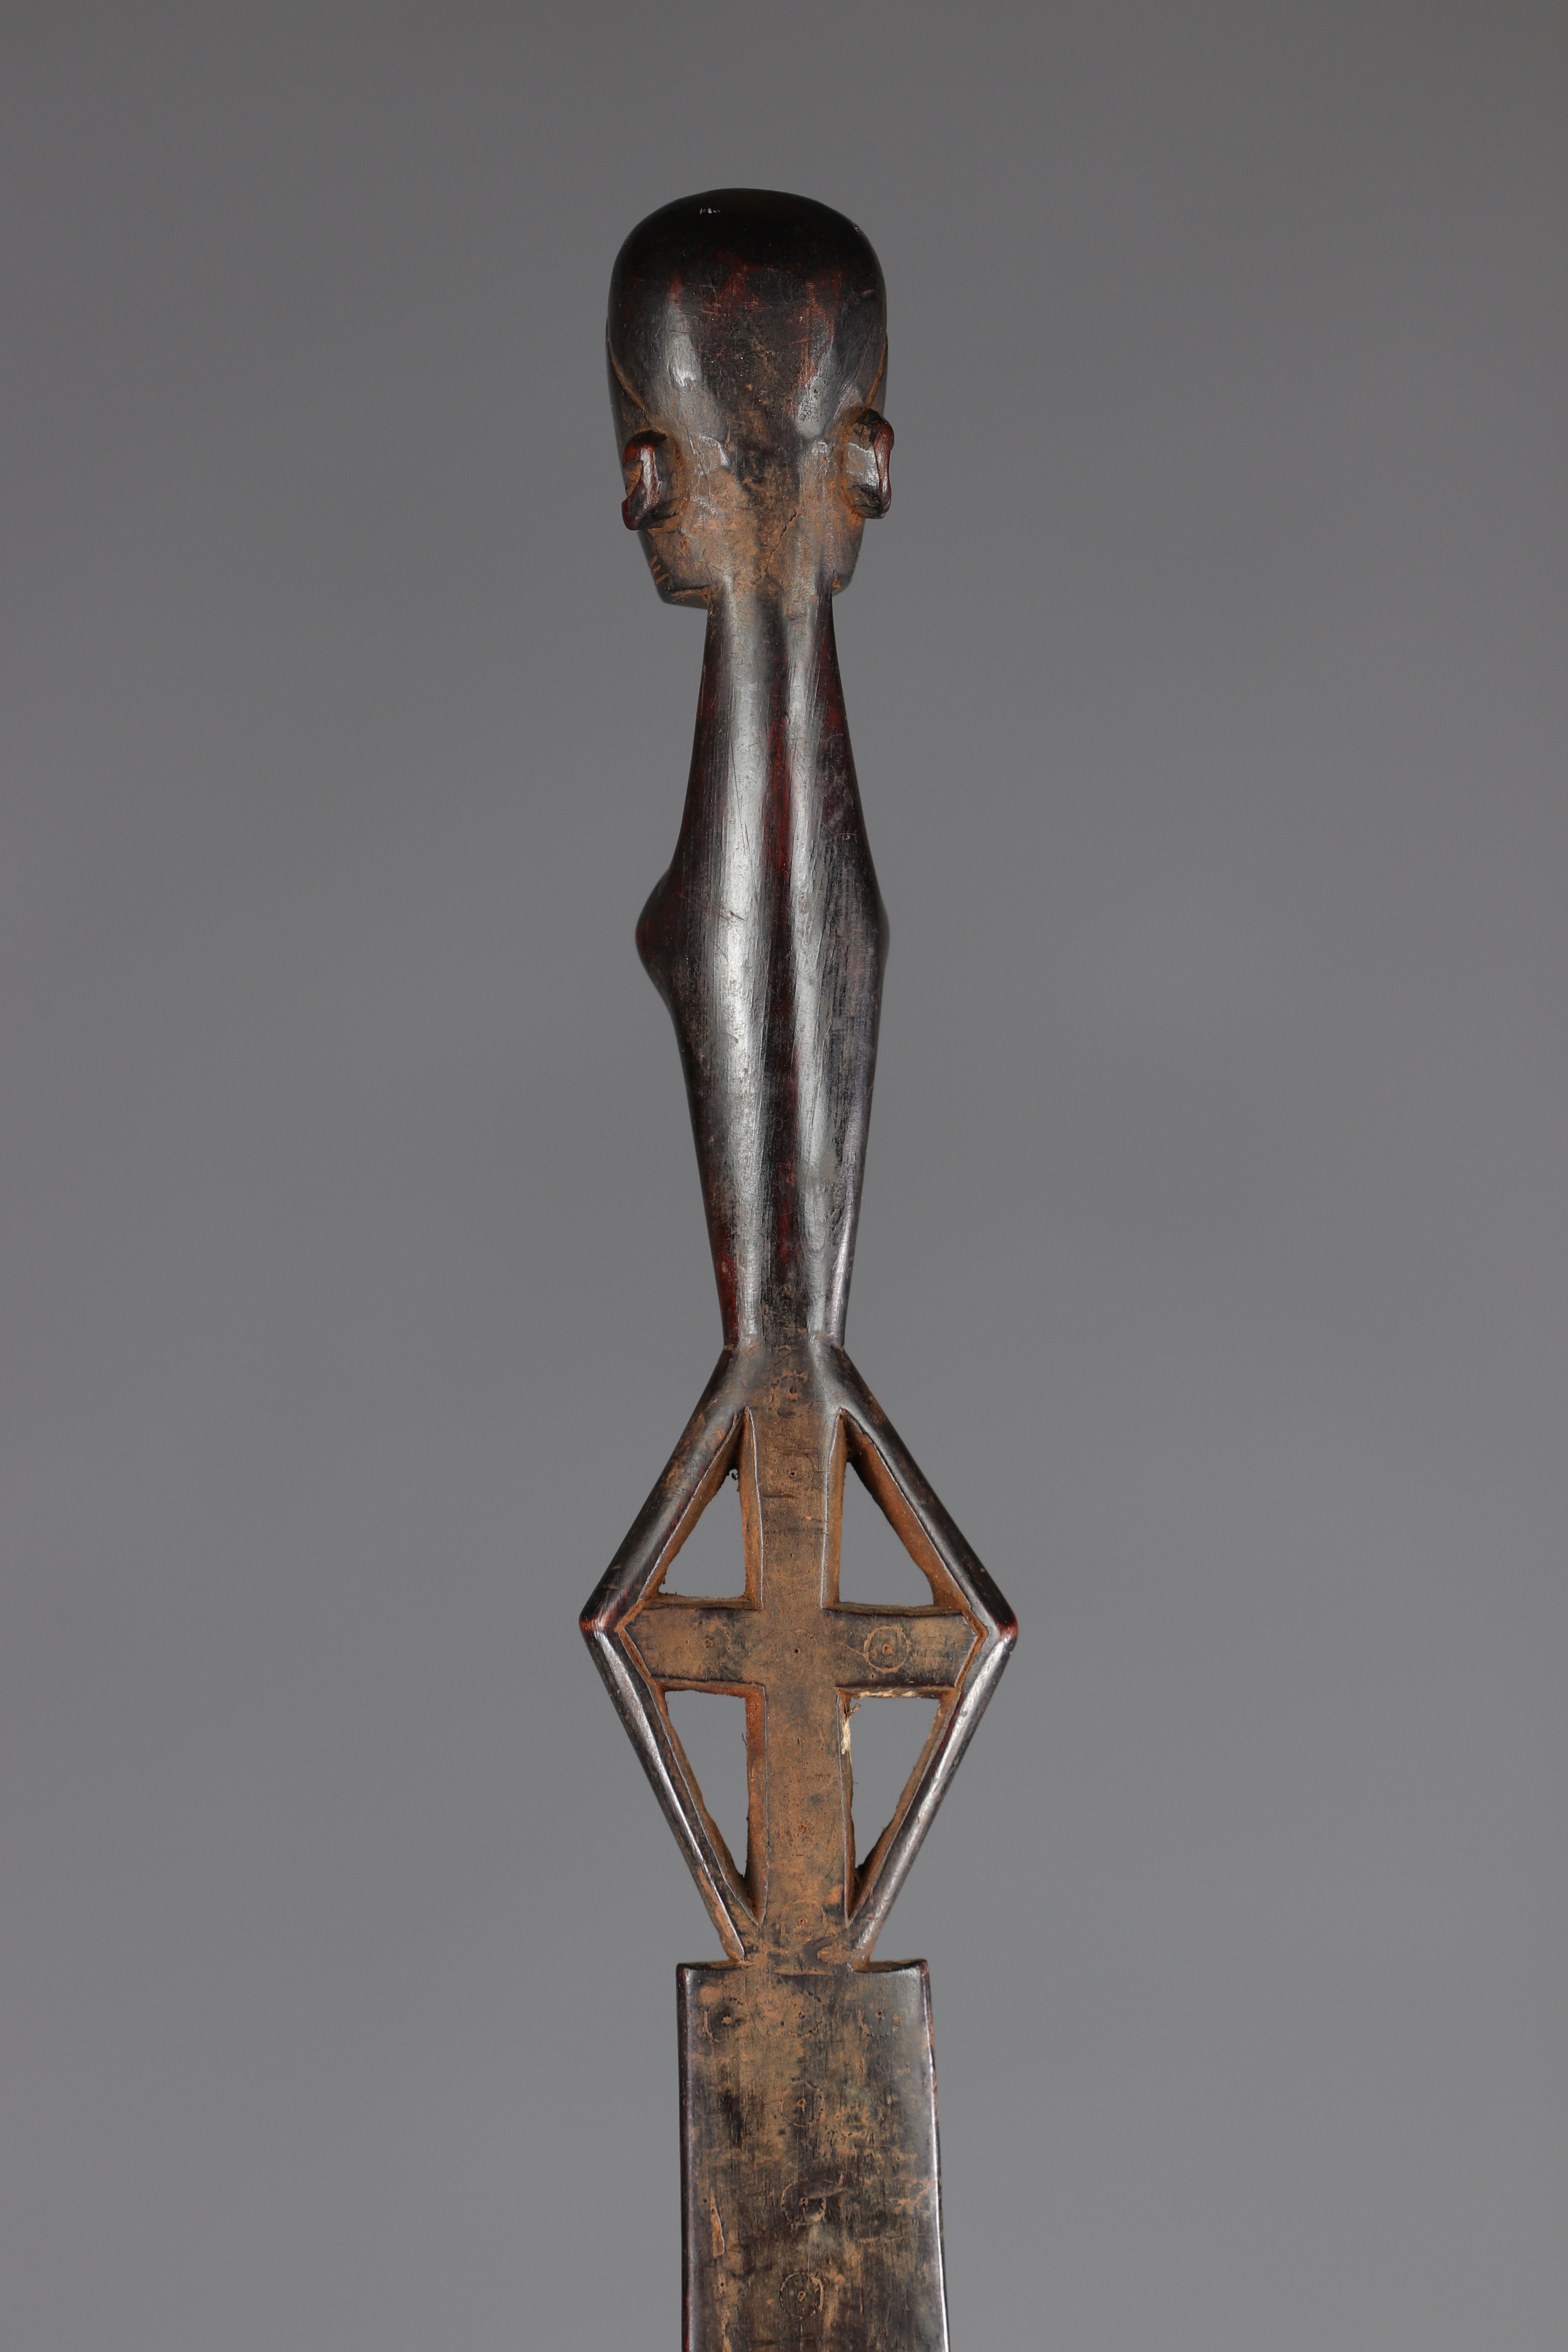 Scepter of dignitary Makonde 20th century - private collection Belgium- Tanzania - Africa - Image 6 of 6